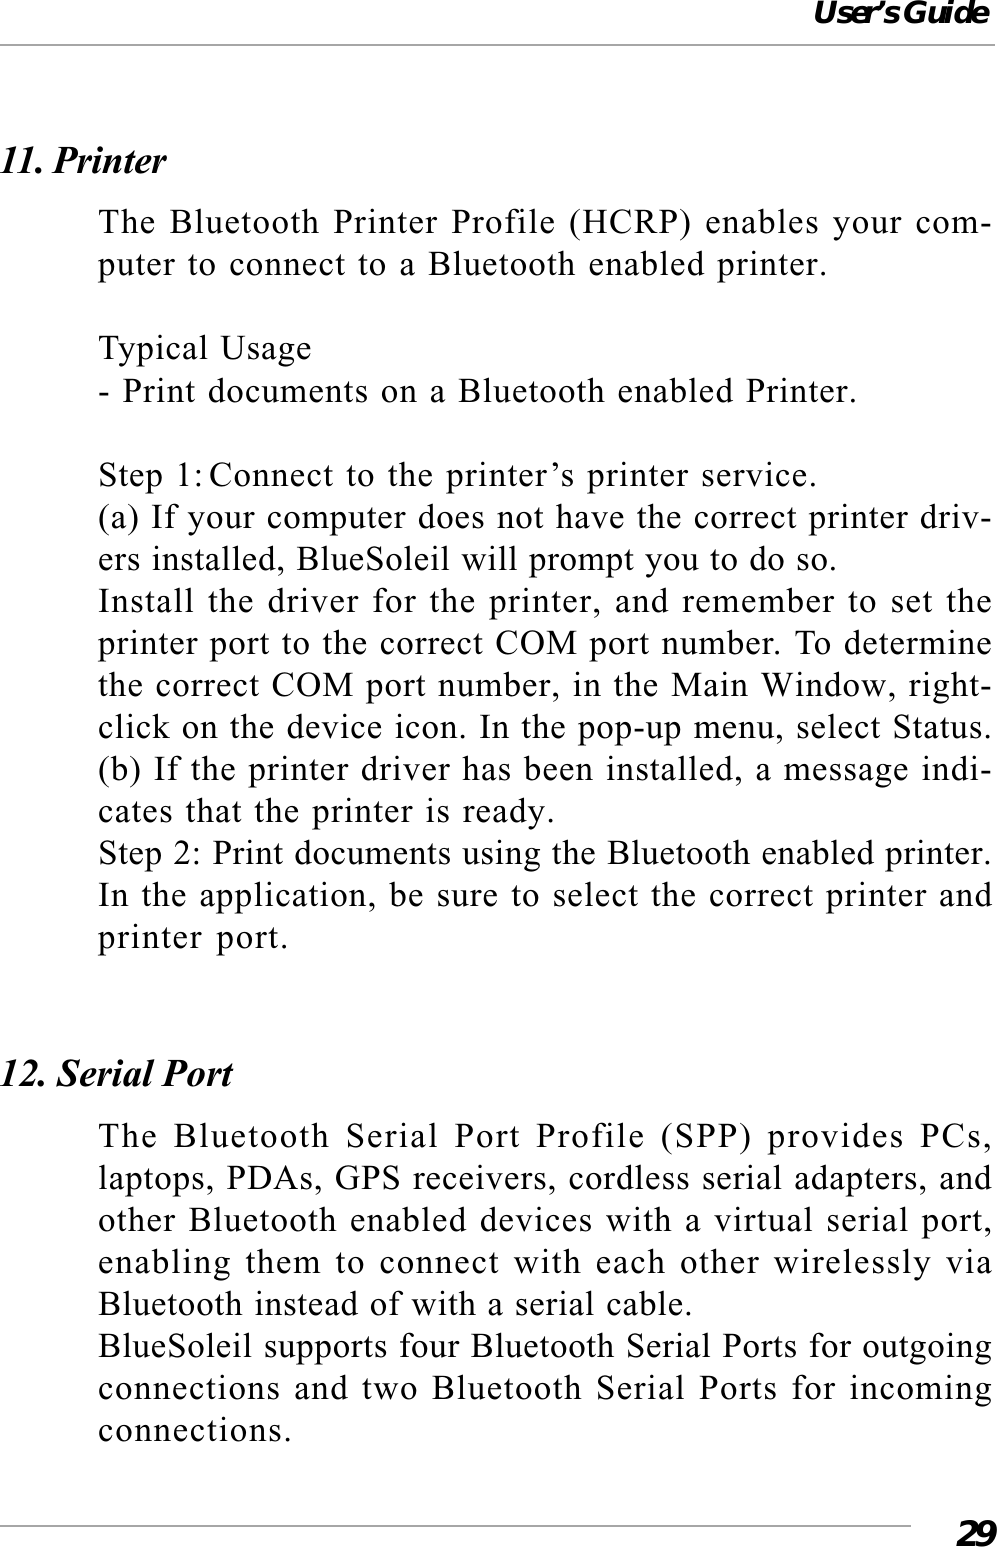 User’s Guide2911. PrinterThe Bluetooth Printer Profile (HCRP) enables your com-puter to connect to a Bluetooth enabled printer.Typical Usage- Print documents on a Bluetooth enabled Printer.Step 1: Connect to the printer’s printer service.(a) If your computer does not have the correct printer driv-ers installed, BlueSoleil will prompt you to do so.Install the driver for the printer, and remember to set theprinter port to the correct COM port number. To determinethe correct COM port number, in the Main Window, right-click on the device icon. In the pop-up menu, select Status.(b) If the printer driver has been installed, a message indi-cates that the printer is ready.Step 2: Print documents using the Bluetooth enabled printer.In the application, be sure to select the correct printer andprinter port.12. Serial PortThe Bluetooth Serial Port Profile (SPP) provides PCs,laptops, PDAs, GPS receivers, cordless serial adapters, andother Bluetooth enabled devices with a virtual serial port,enabling them to connect with each other wirelessly viaBluetooth instead of with a serial cable.BlueSoleil supports four Bluetooth Serial Ports for outgoingconnections and two Bluetooth Serial Ports for incomingconnections.